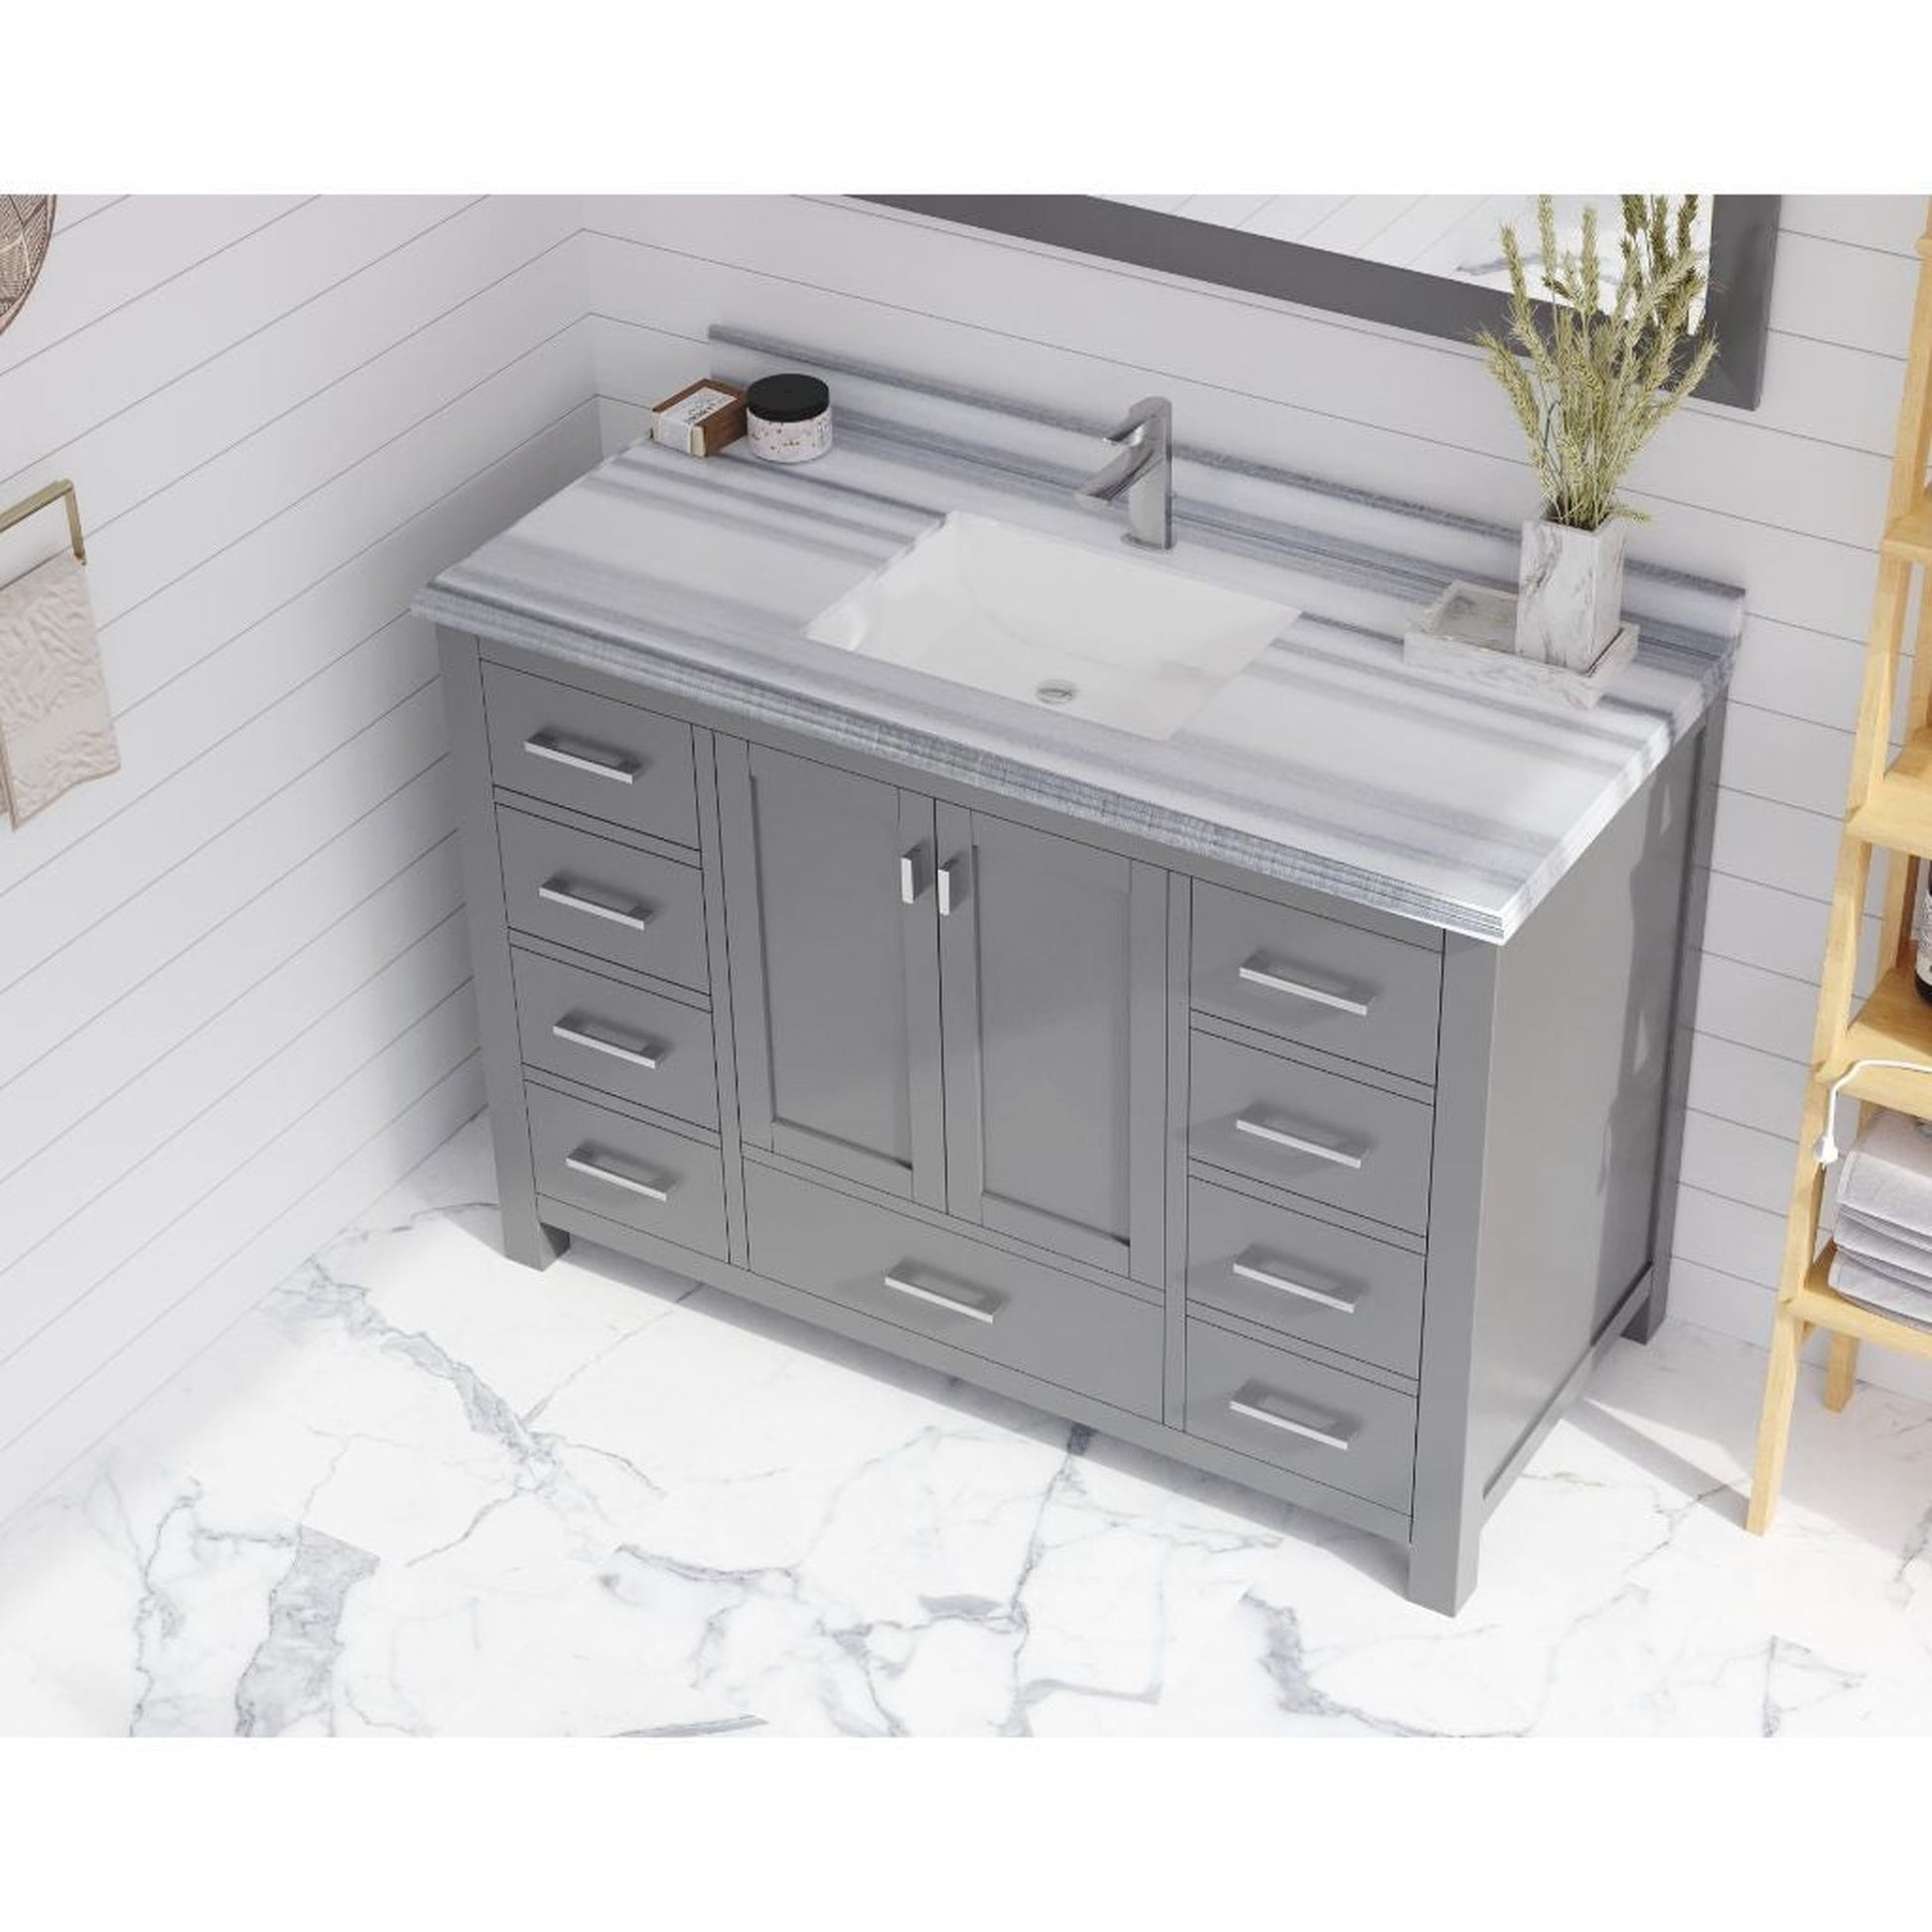 Laviva Wilson 48" Gray Vanity Base and White Stripes Marble Countertop With Rectangular Ceramic Sink